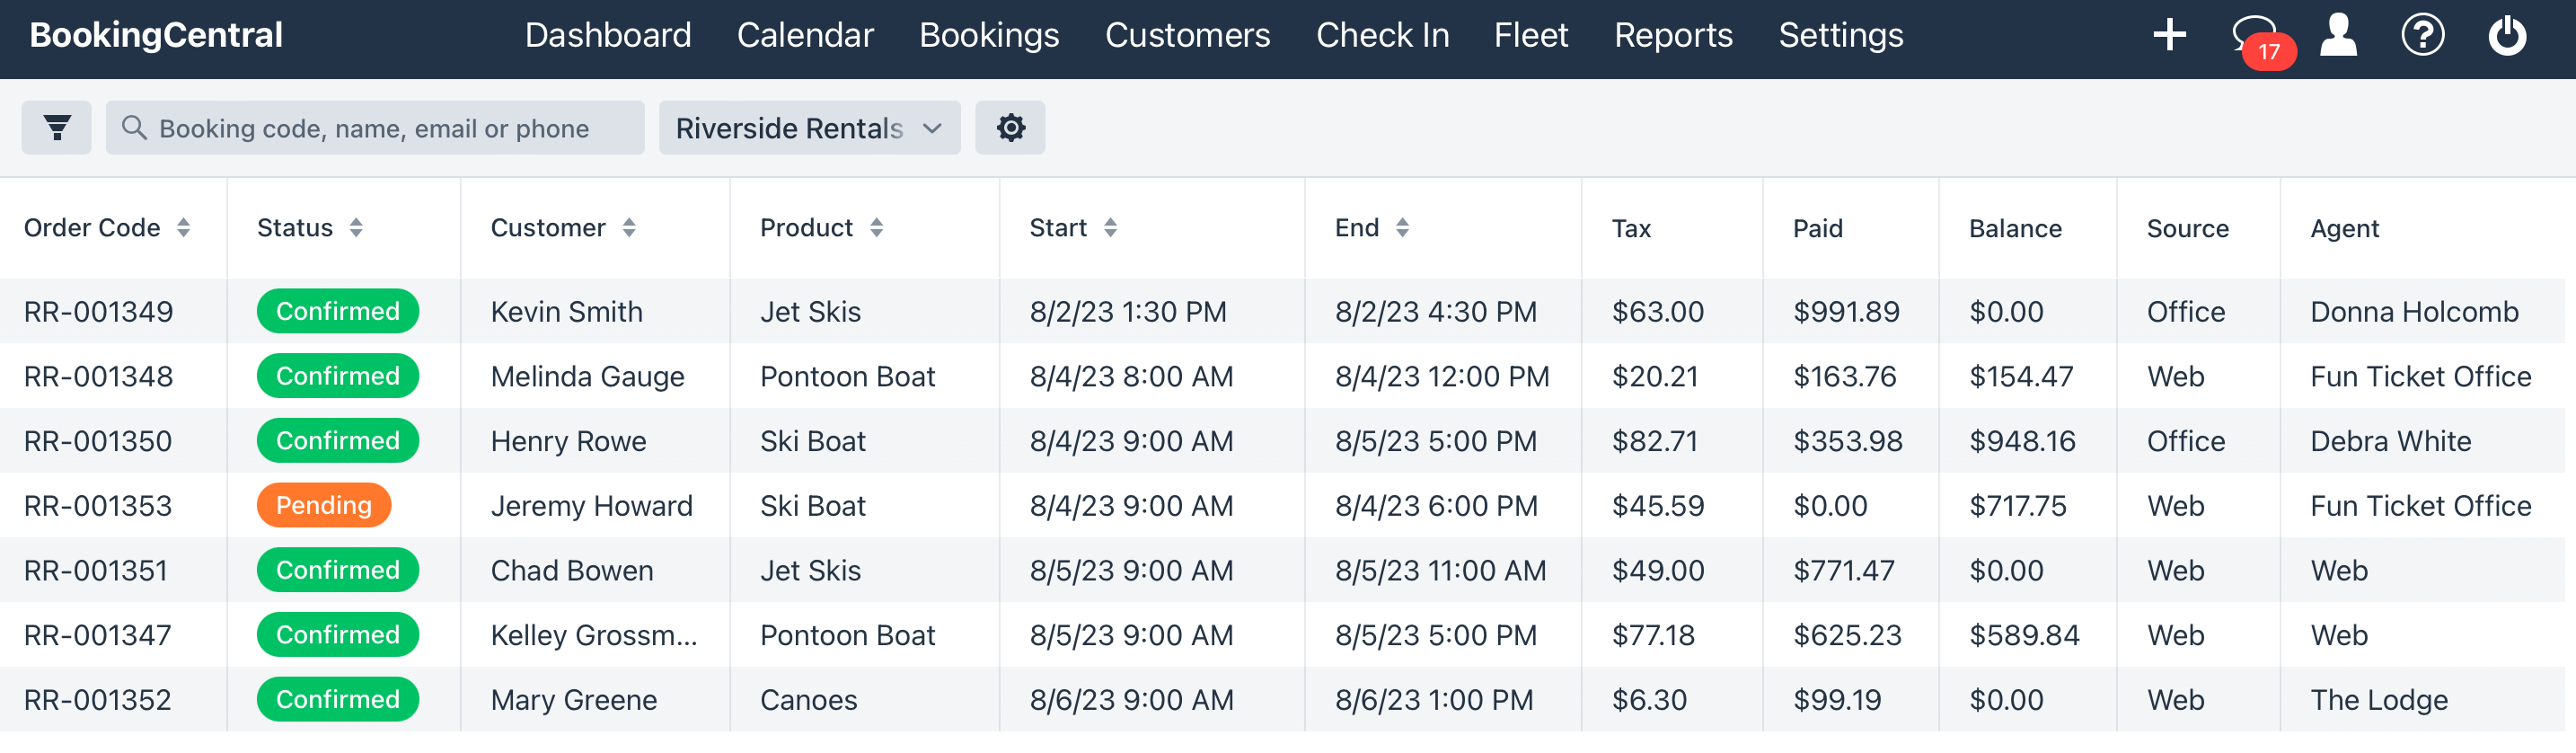 Bookings Tab with Source Agent.png